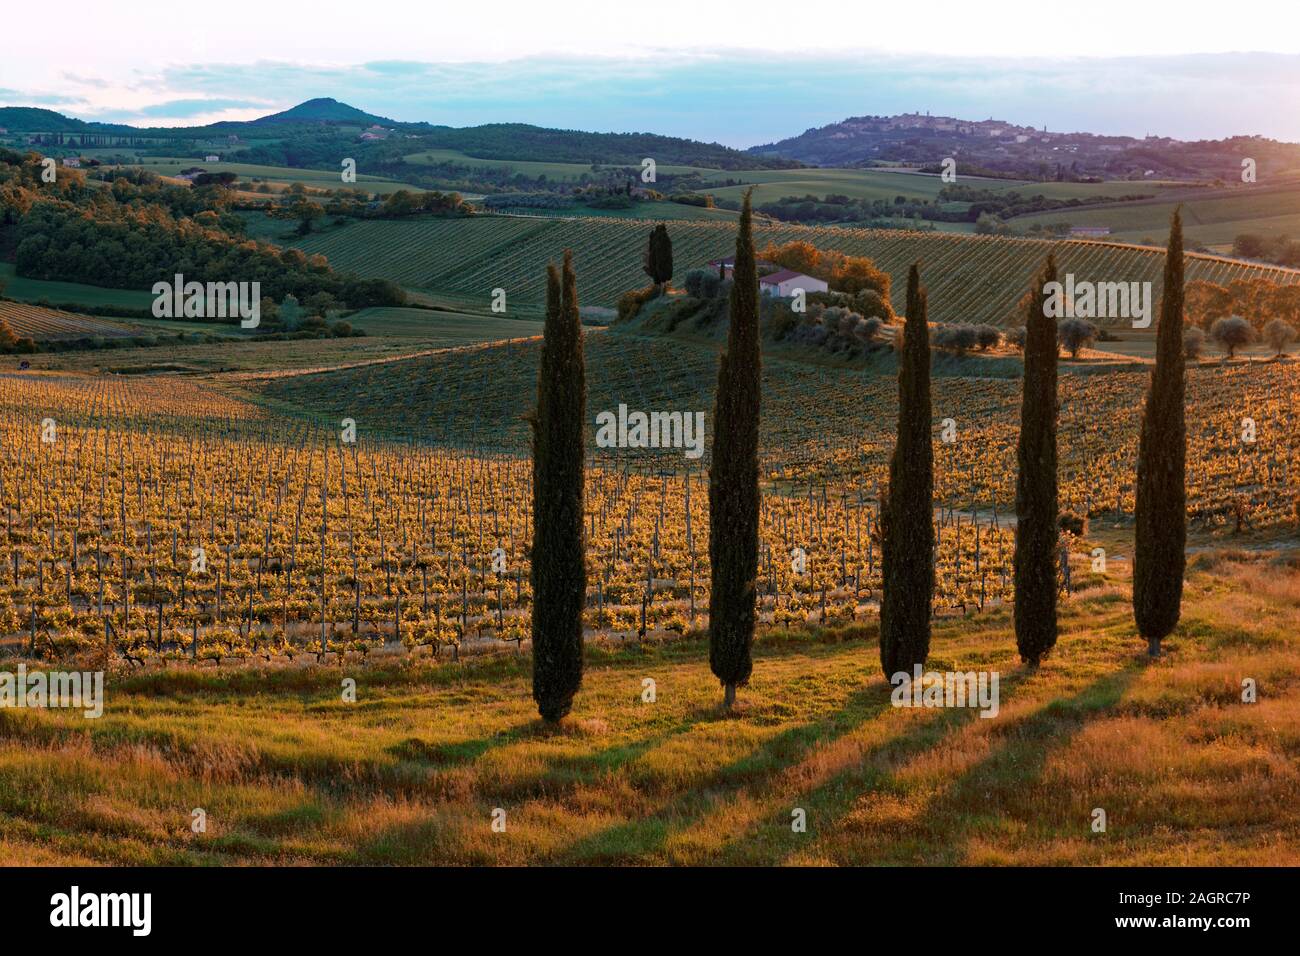 Tuscan vineyard and cypresses at sunset, toned image Stock Photo